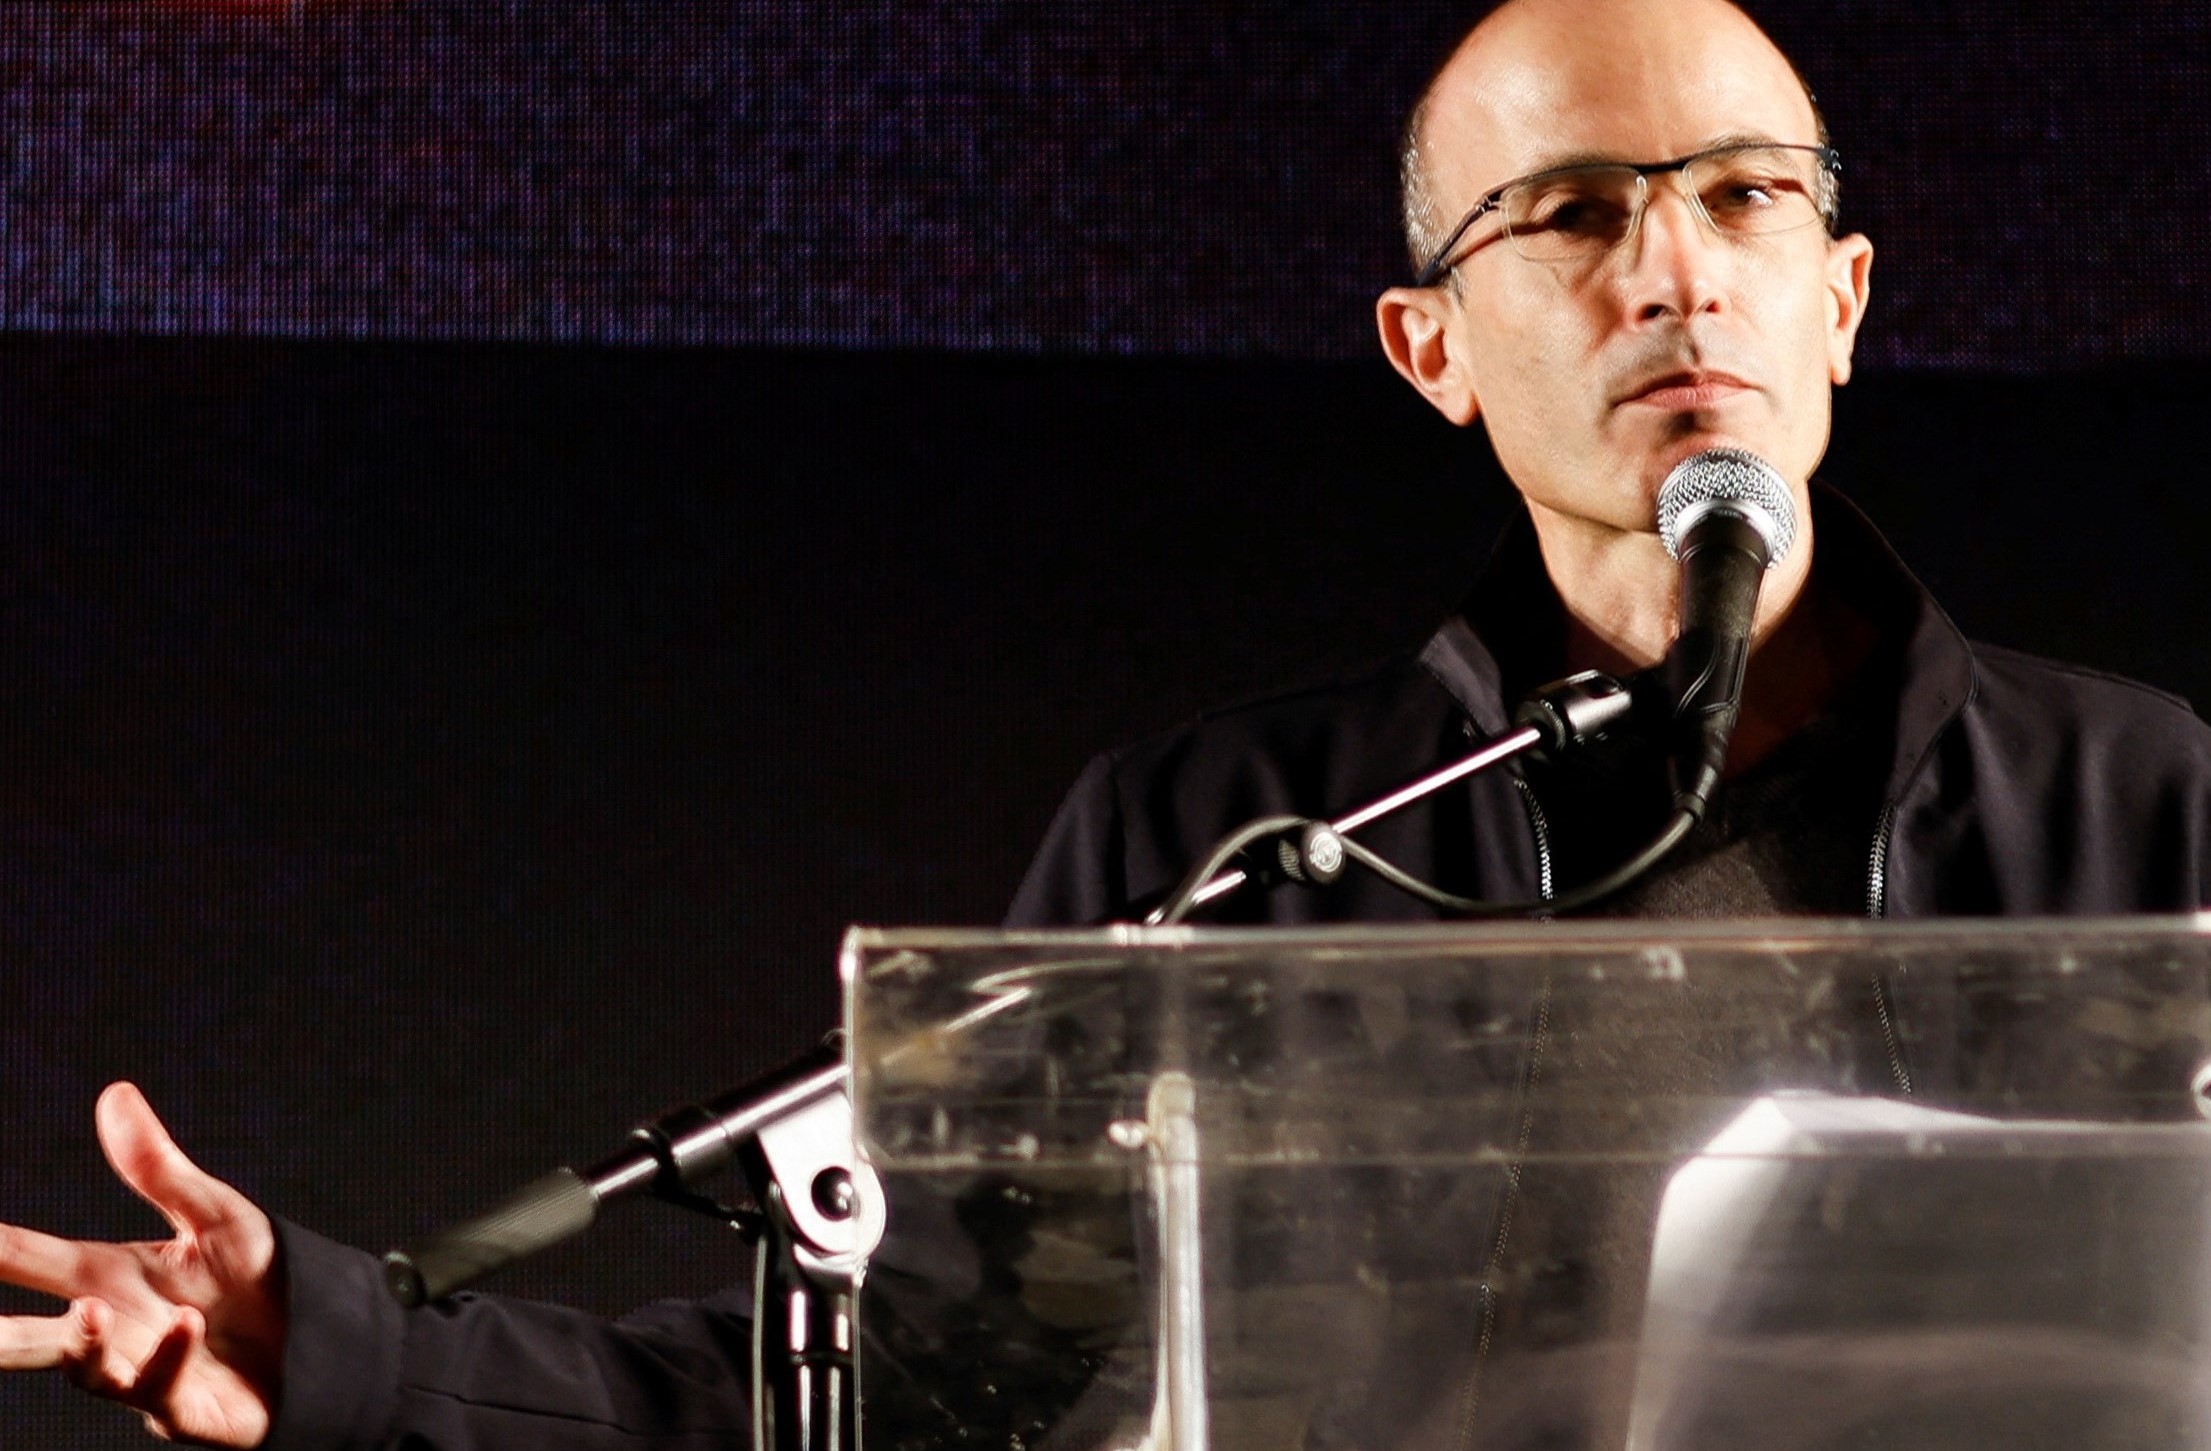 Yuval Noah Harari addressing a protest March – The Guardian published his speech in its opinion section. 